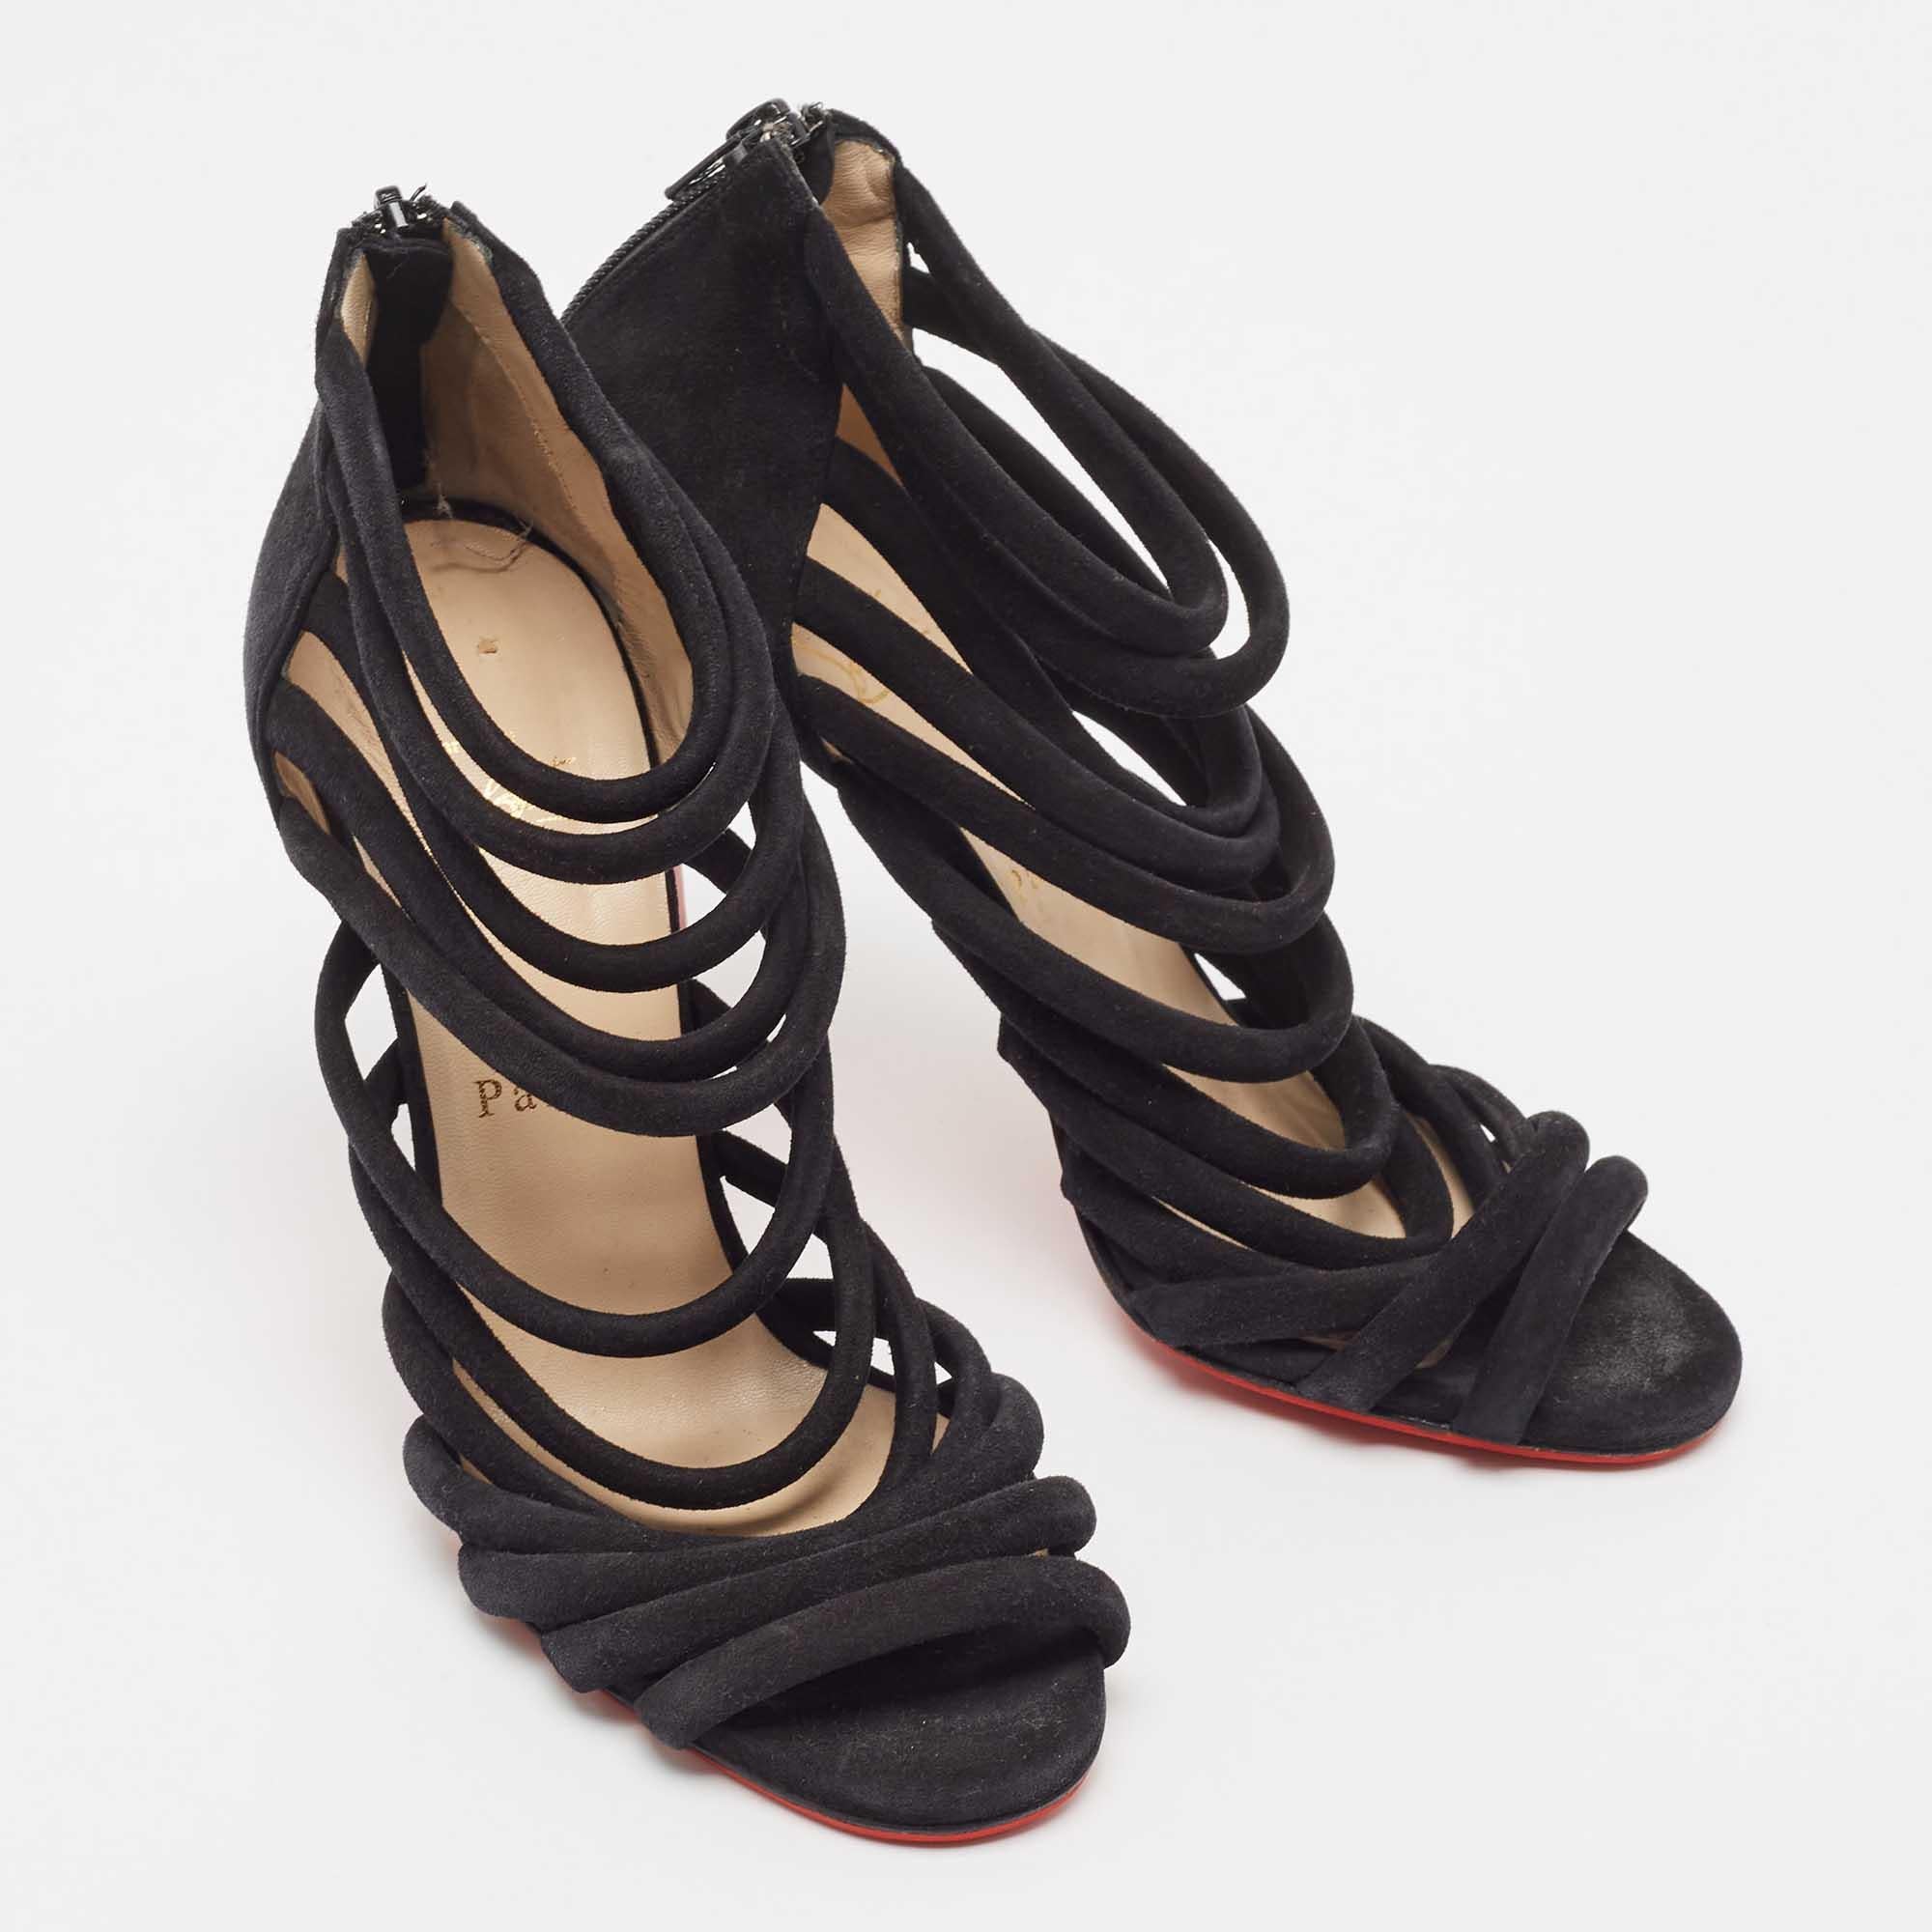 Christian Louboutin Black Suede Strappy Sandals Size 38.5 For Sale 3